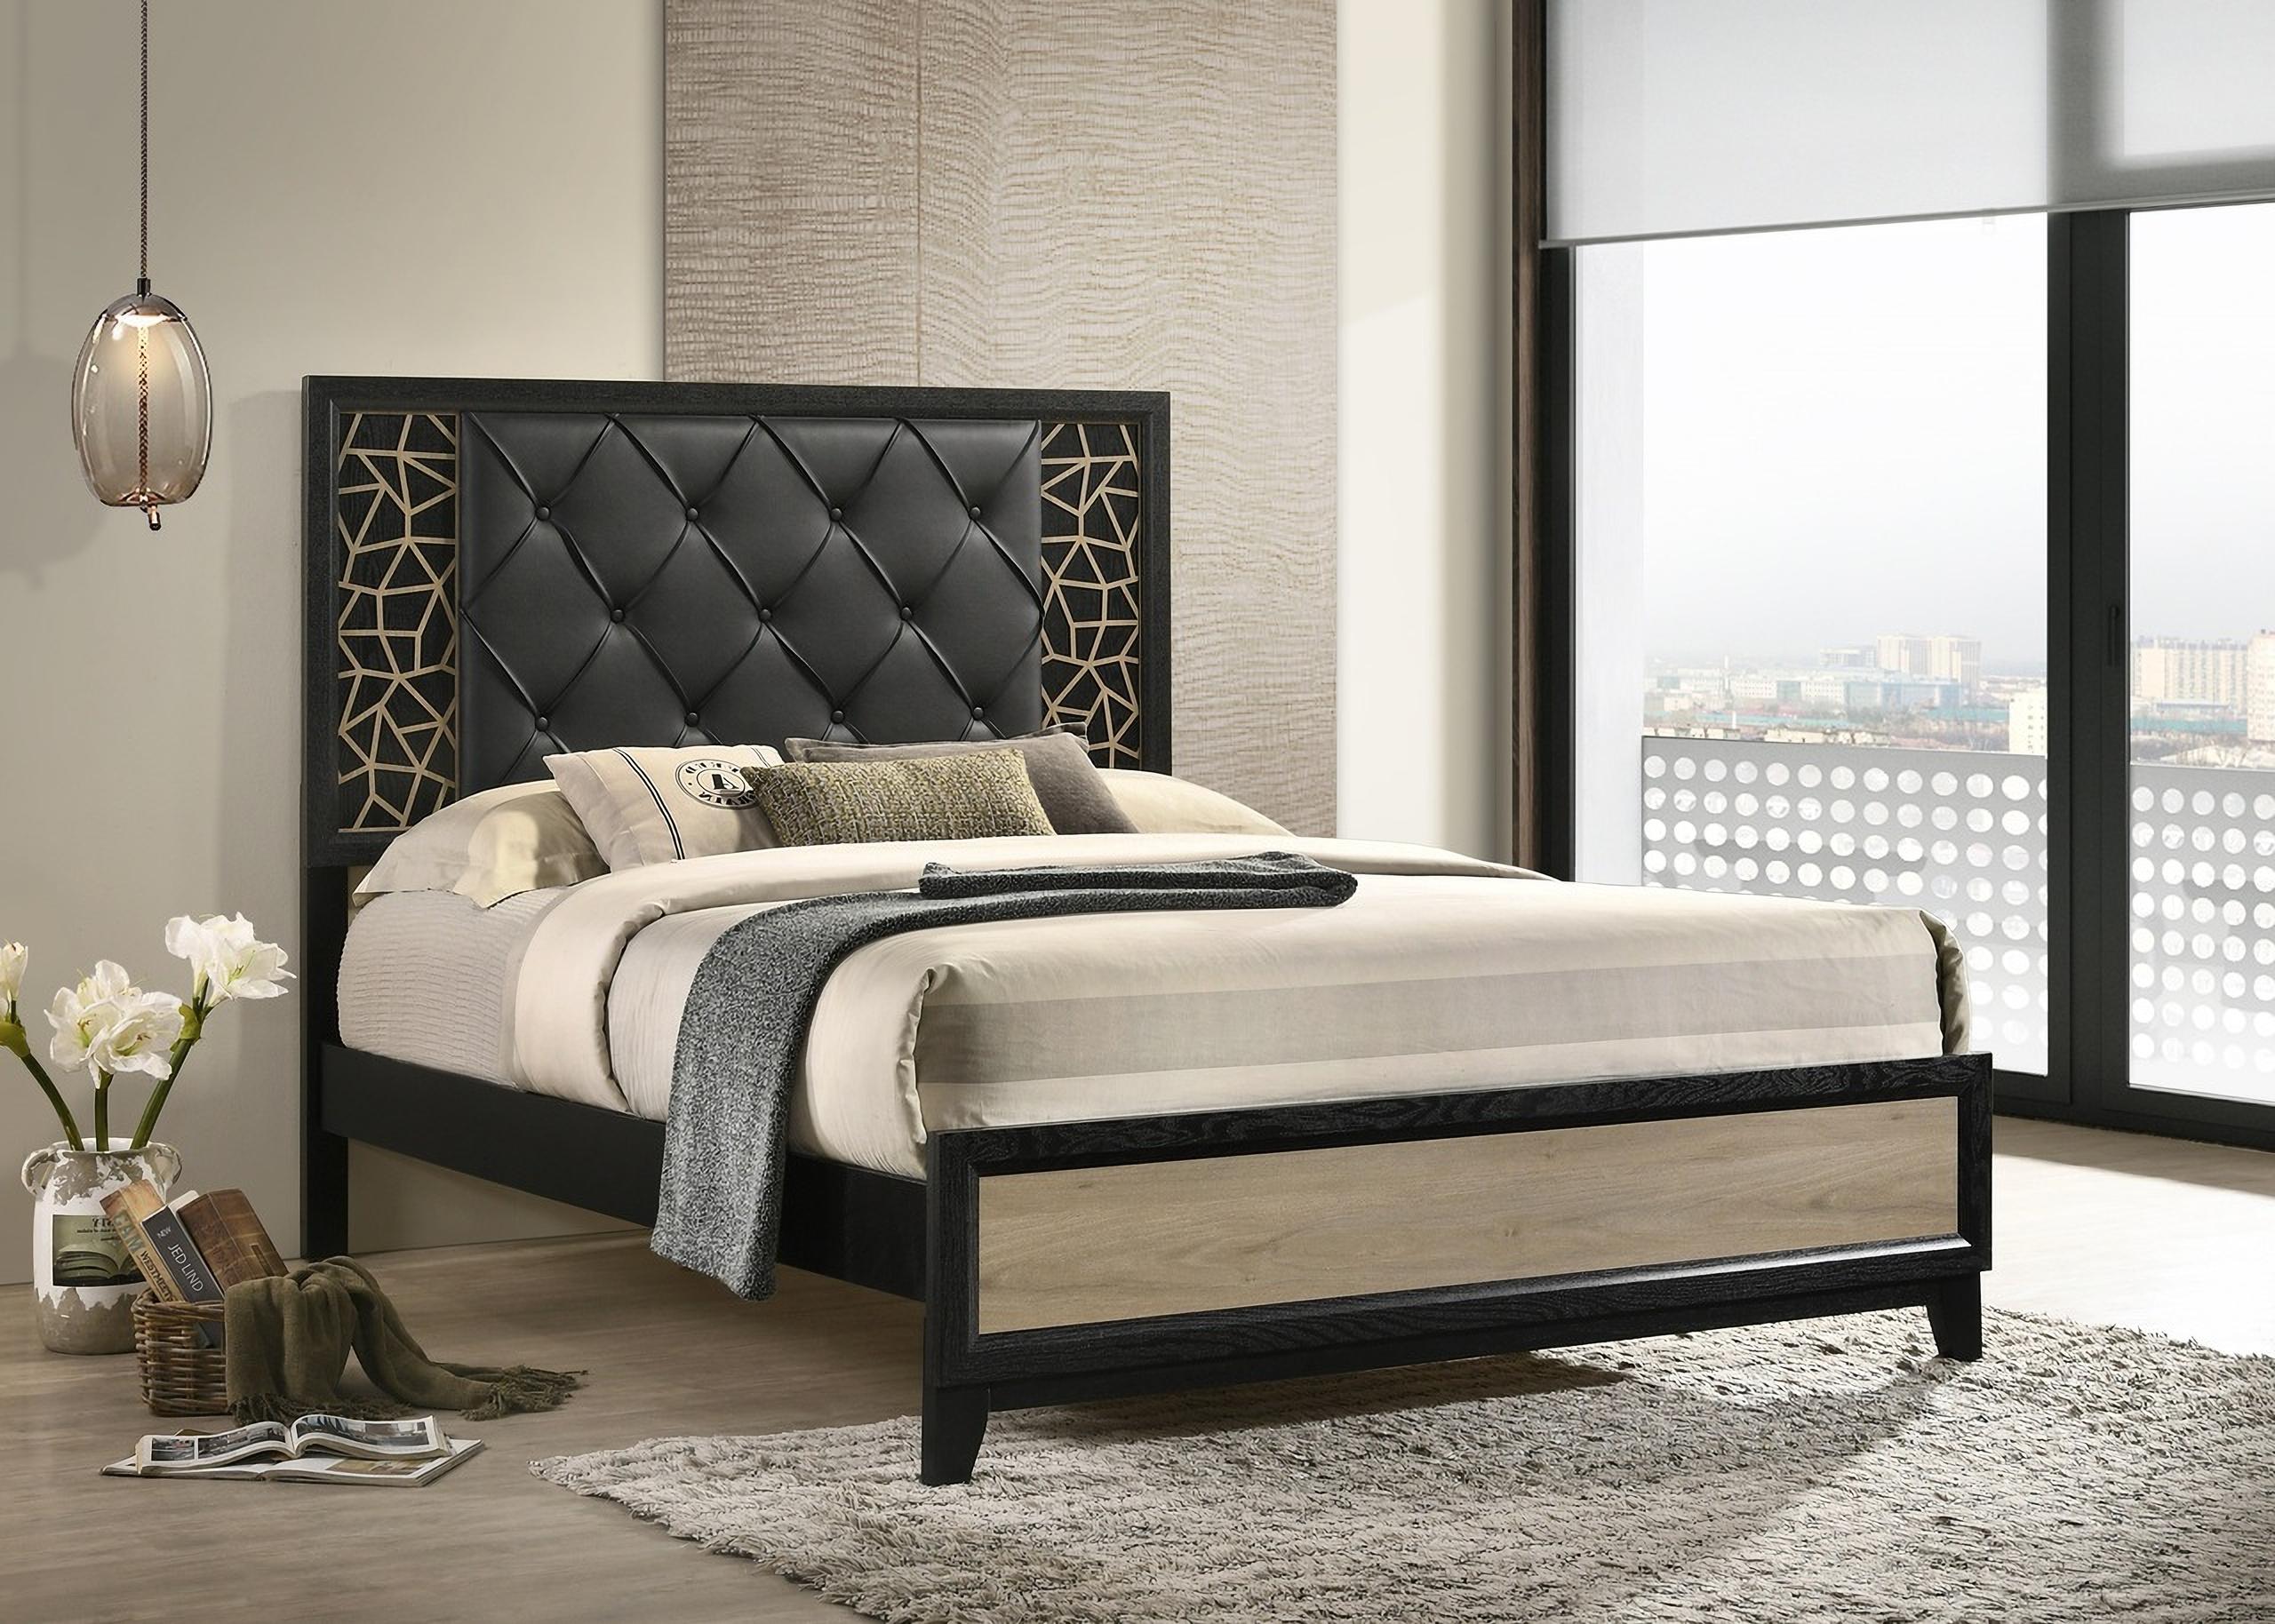 

    
Upholstered King Bed Set 4Pcs with Wooden Pattern In Black Selena Galaxy Home Contemporary
